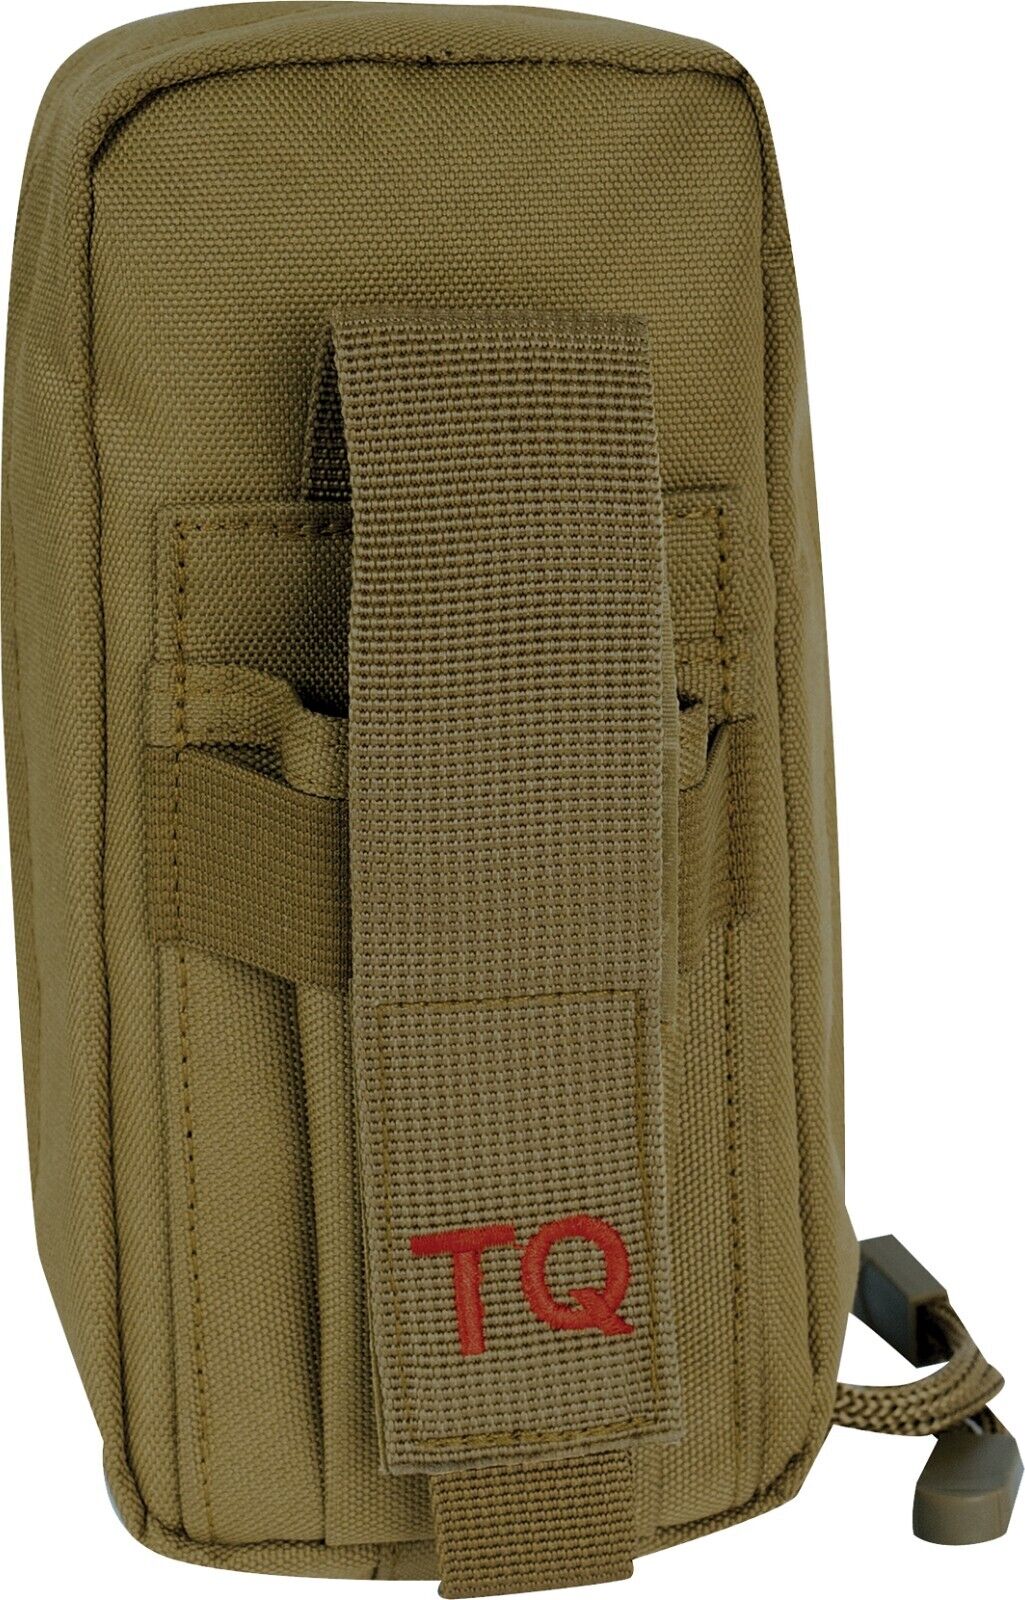 Rothco Coyote Fast Action First Aid Tourniquet Pouch Hook & Loop Rapid Access